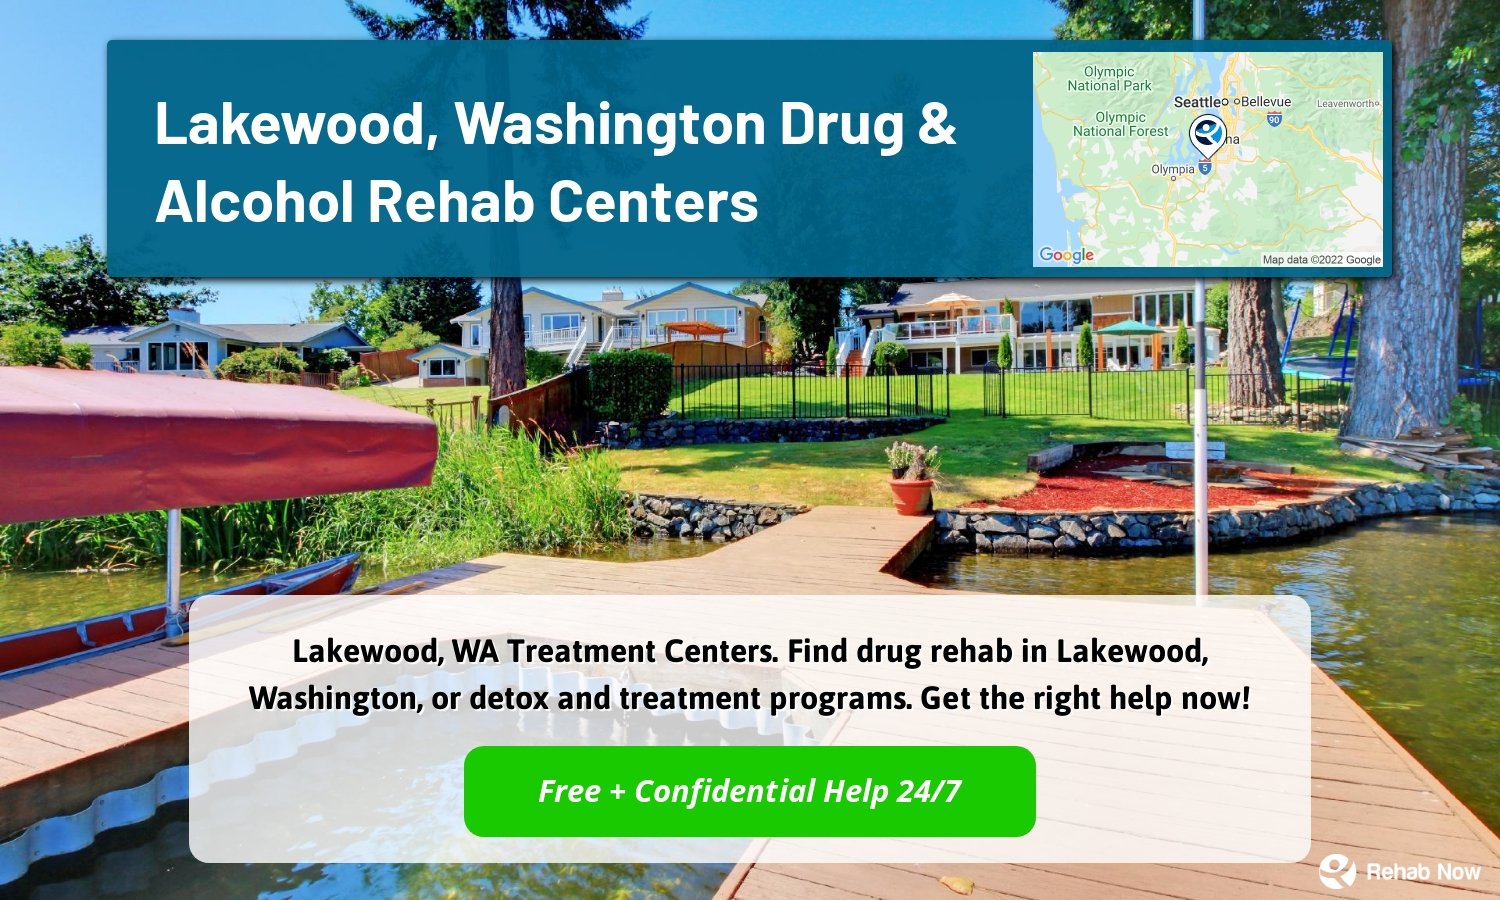 Lakewood, WA Treatment Centers. Find drug rehab in Lakewood, Washington, or detox and treatment programs. Get the right help now!